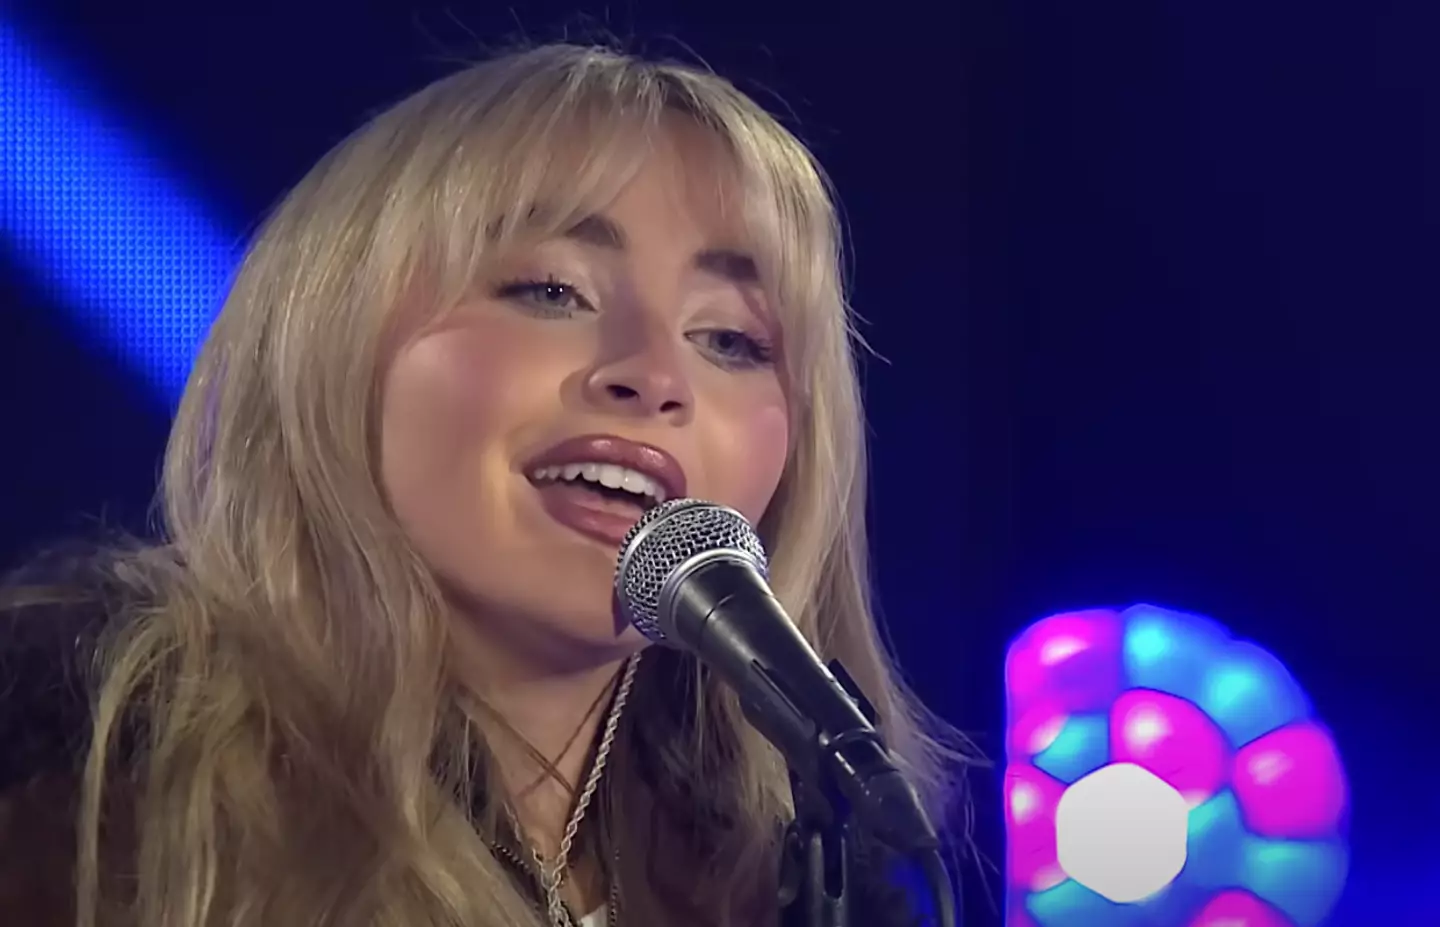 Sabrina Carpenter's ad-lib outro mentioned a different type of 'BBC'